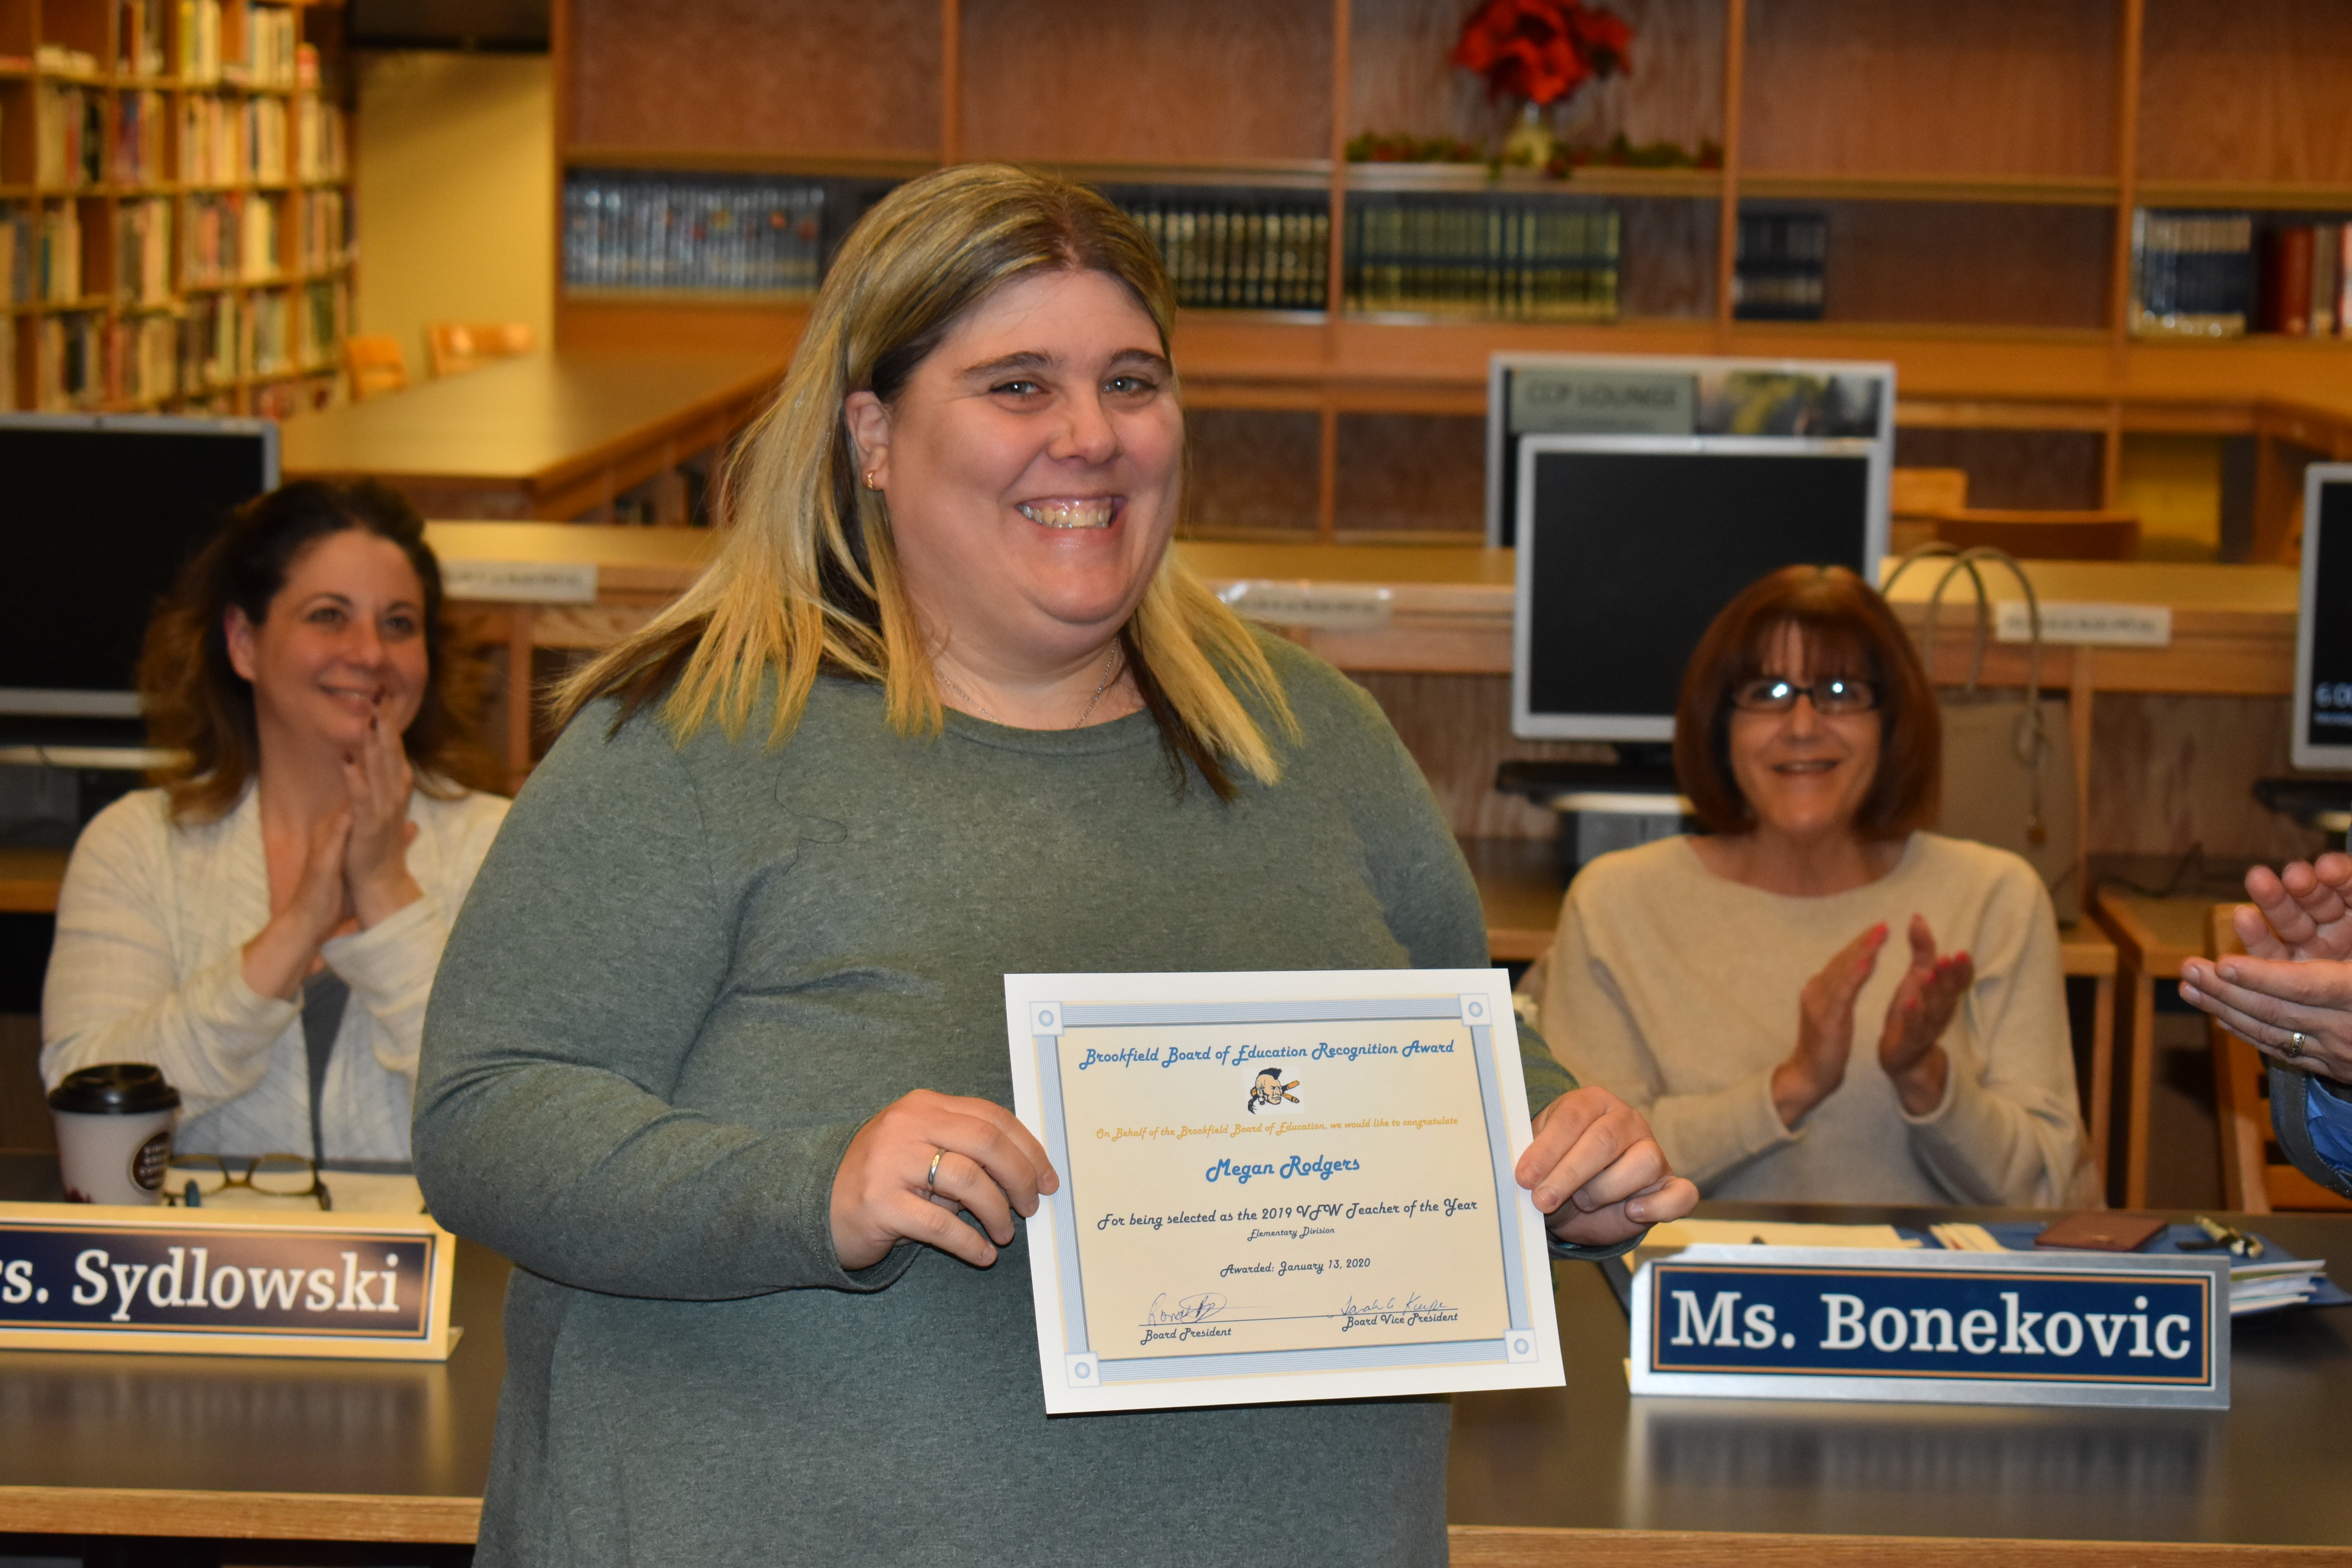 Brookfield Board of Education, at its January meeting, congratulates elementary teacher Megan Rodgers for winning the Smart-Maher VFW Citizenship Education Teachers Award for Ohio. In March, Rodgers was named the national awardee.